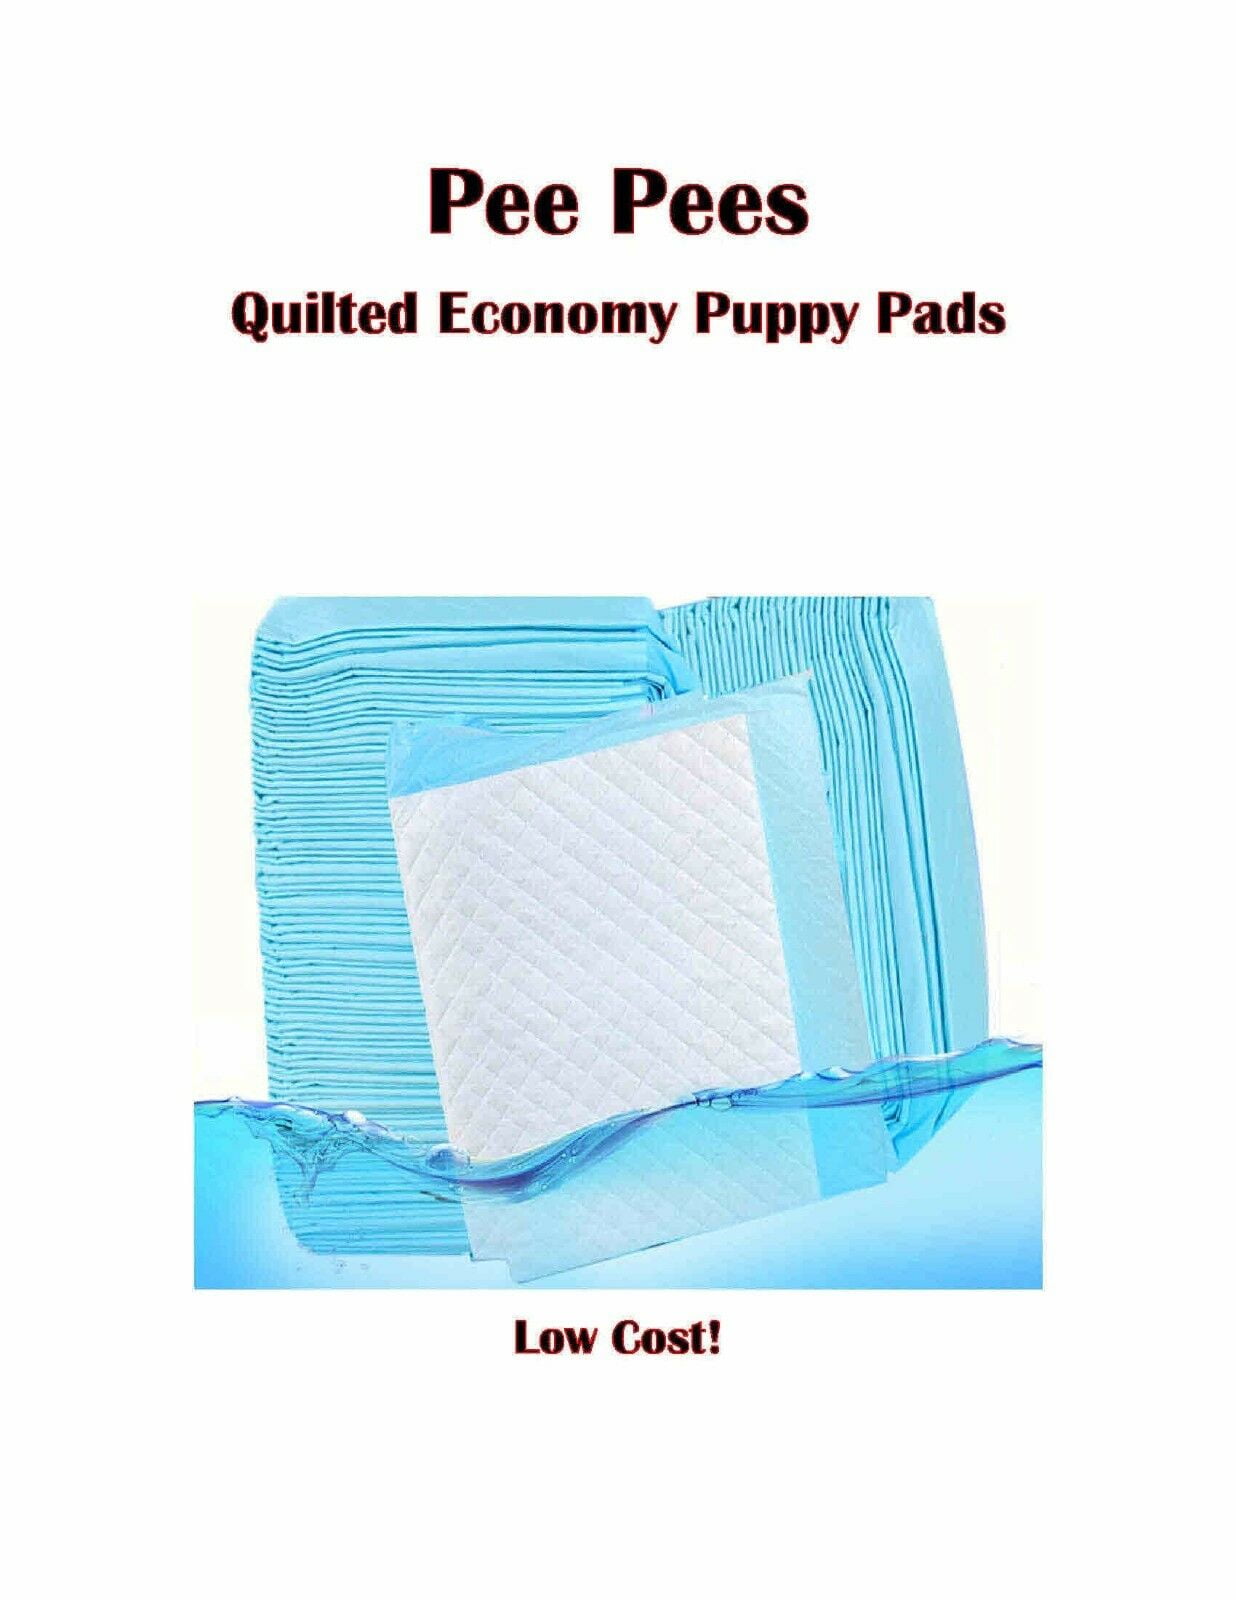 CHEAP 300-17x24" Pooh Wee's 4-Ply Quilt Xtra Absorbent Puppy Training Pee Pad